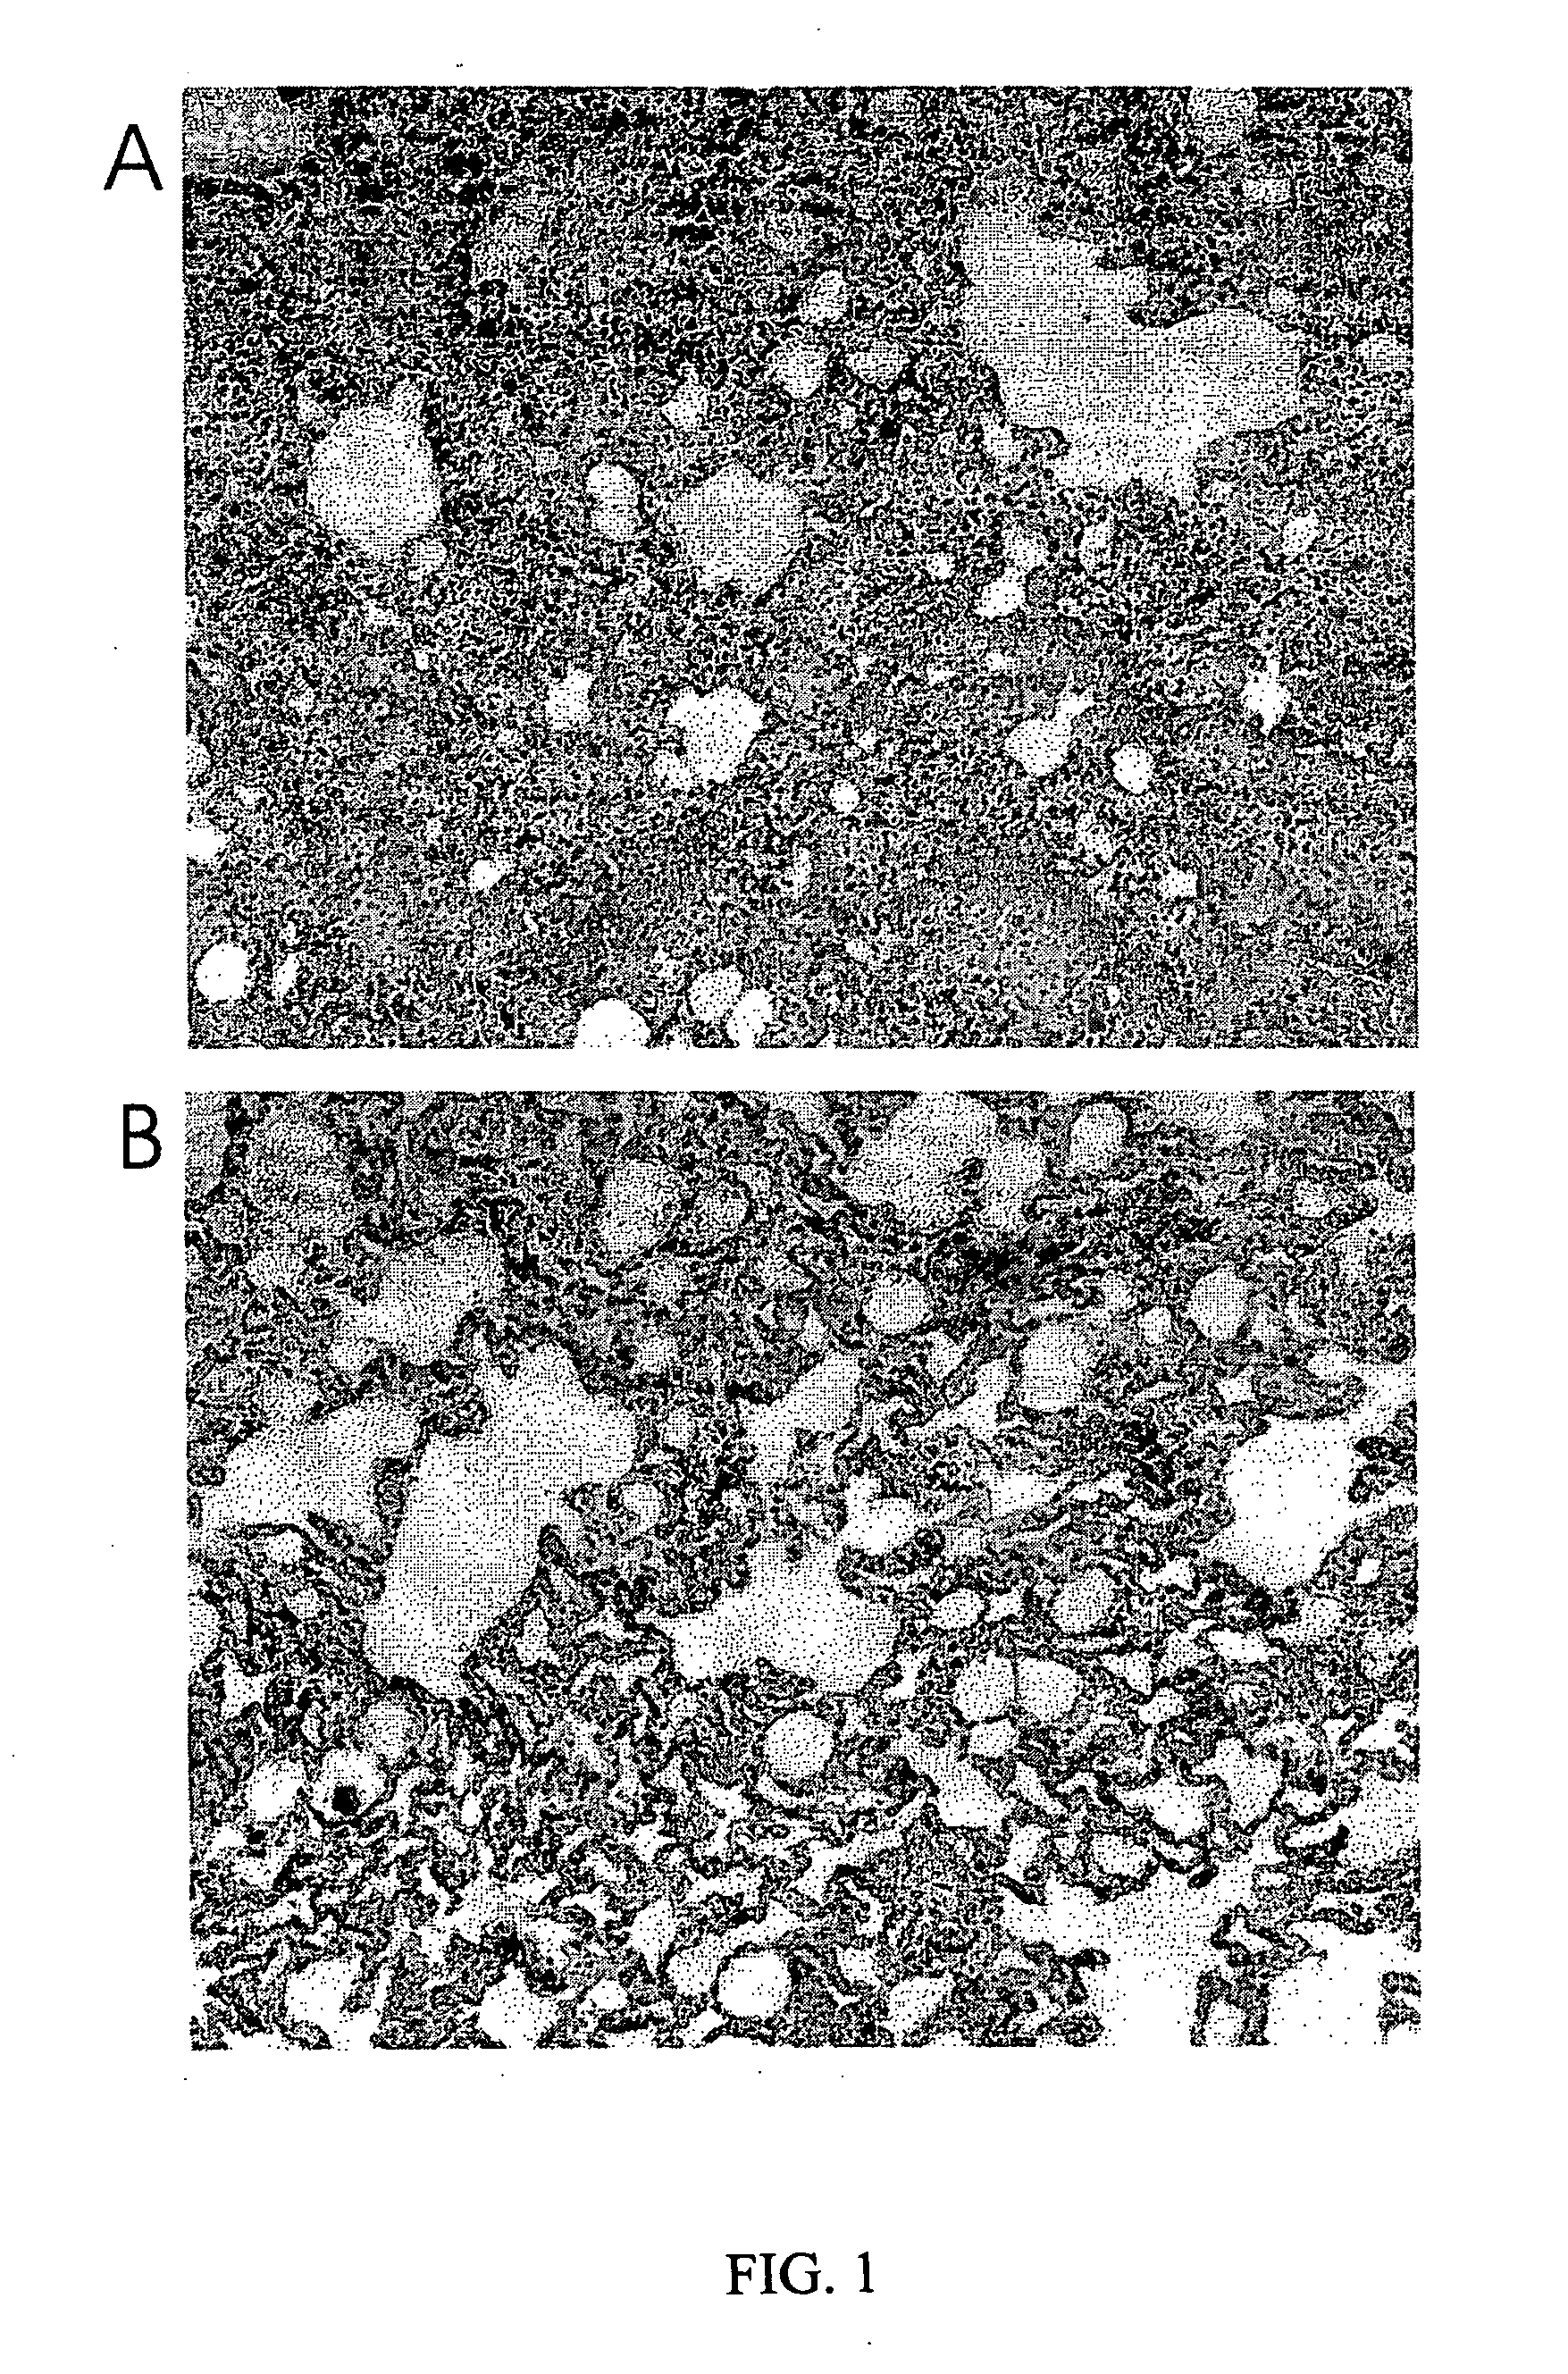 Method for treating or preventing ischemia reperfusion injury or multi-organ failure